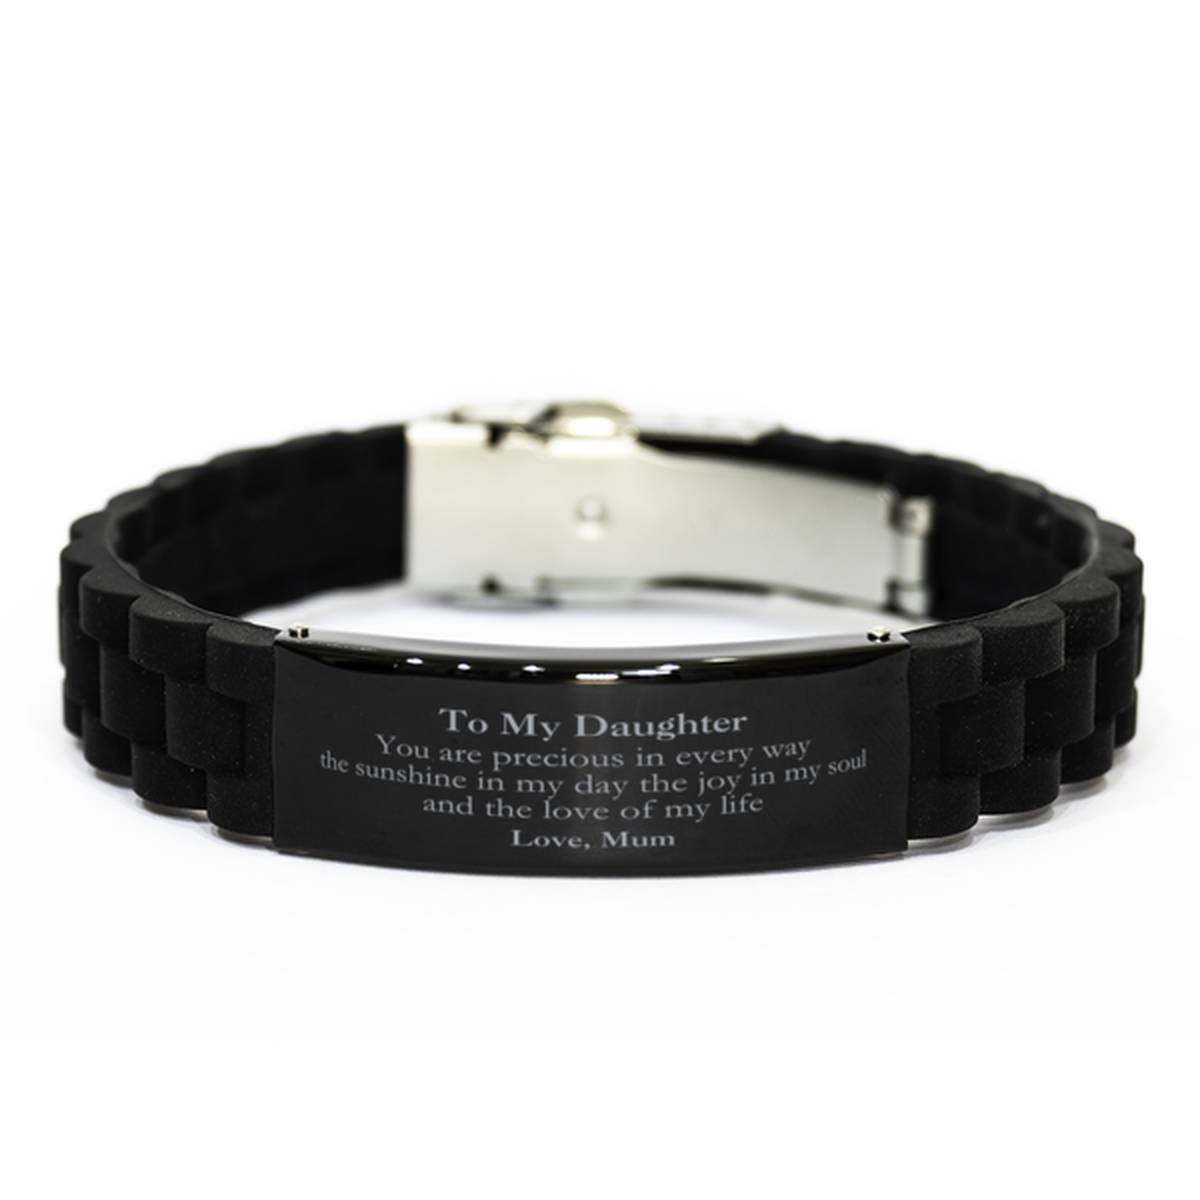 Graduation Gifts for Daughter Black Glidelock Clasp Bracelet Present from Mum, Christmas Daughter Birthday Gifts Daughter You are precious in every way the sunshine in my day. Love, Mum